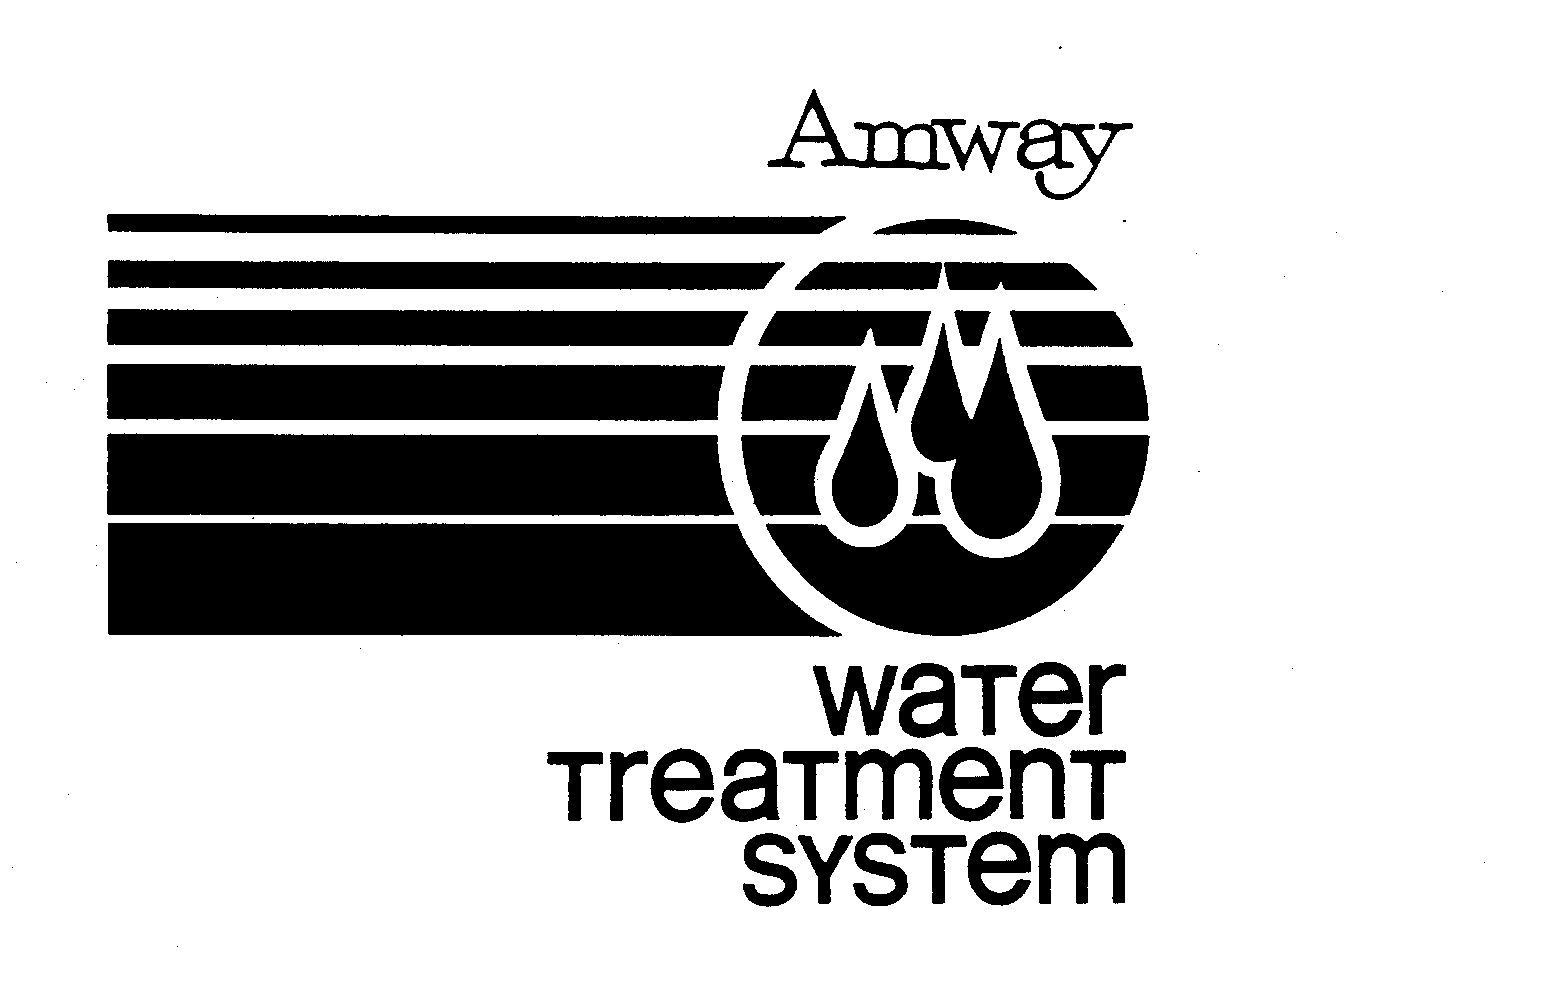  AMWAY WATER TREATMENT SYSTEM